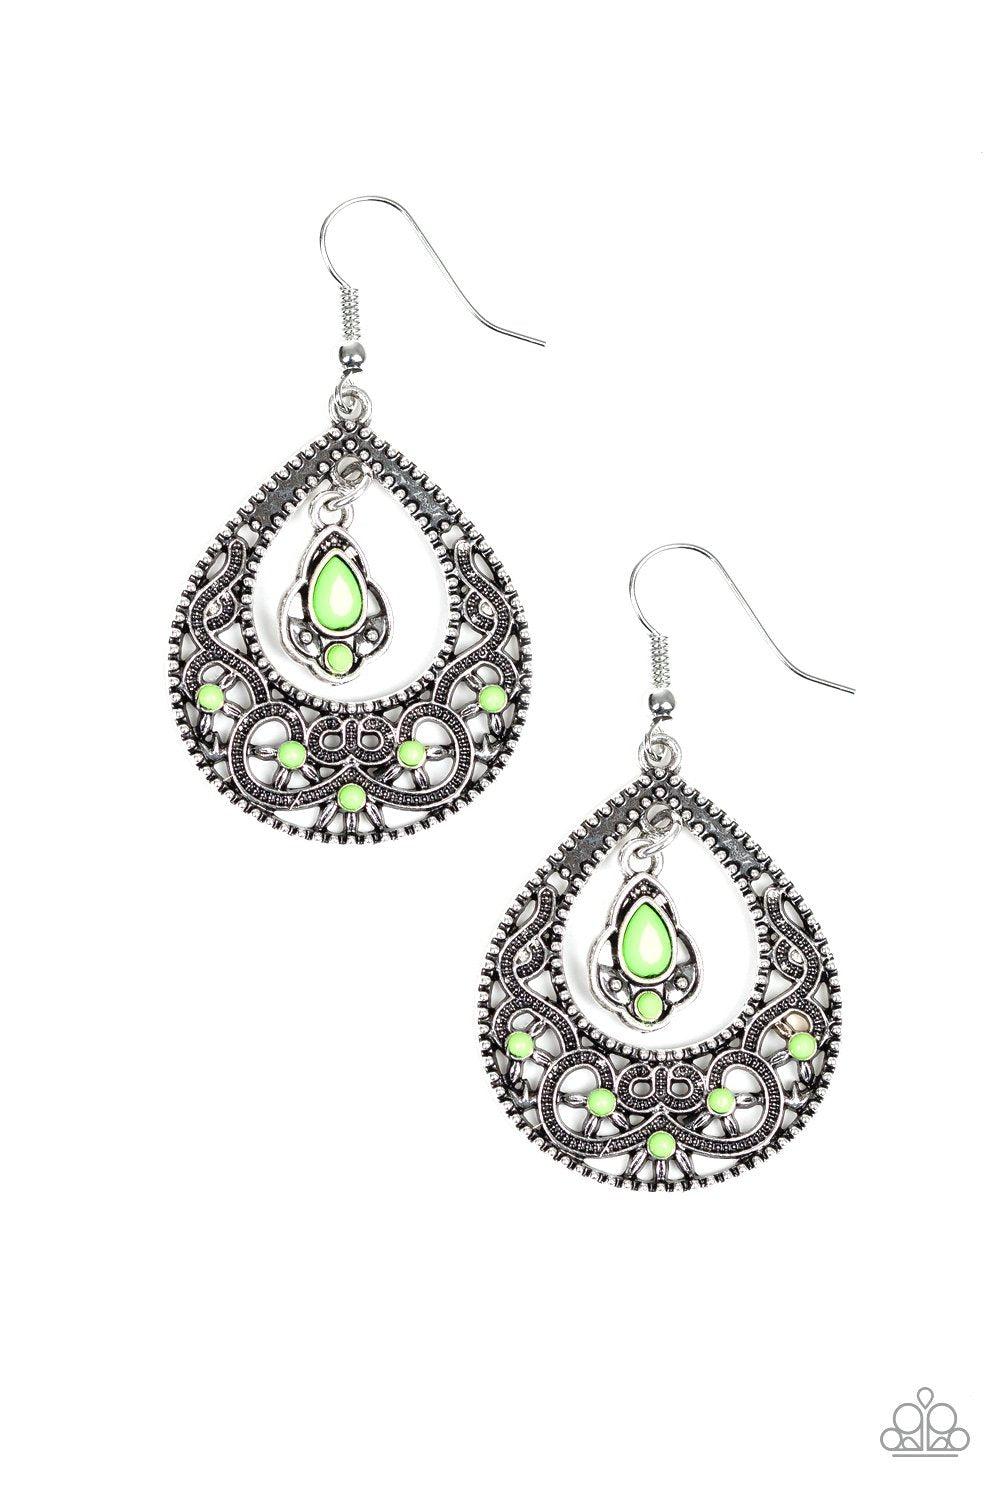 All-Girl GLOW Green and Silver Earrings - Paparazzi Accessories-CarasShop.com - $5 Jewelry by Cara Jewels